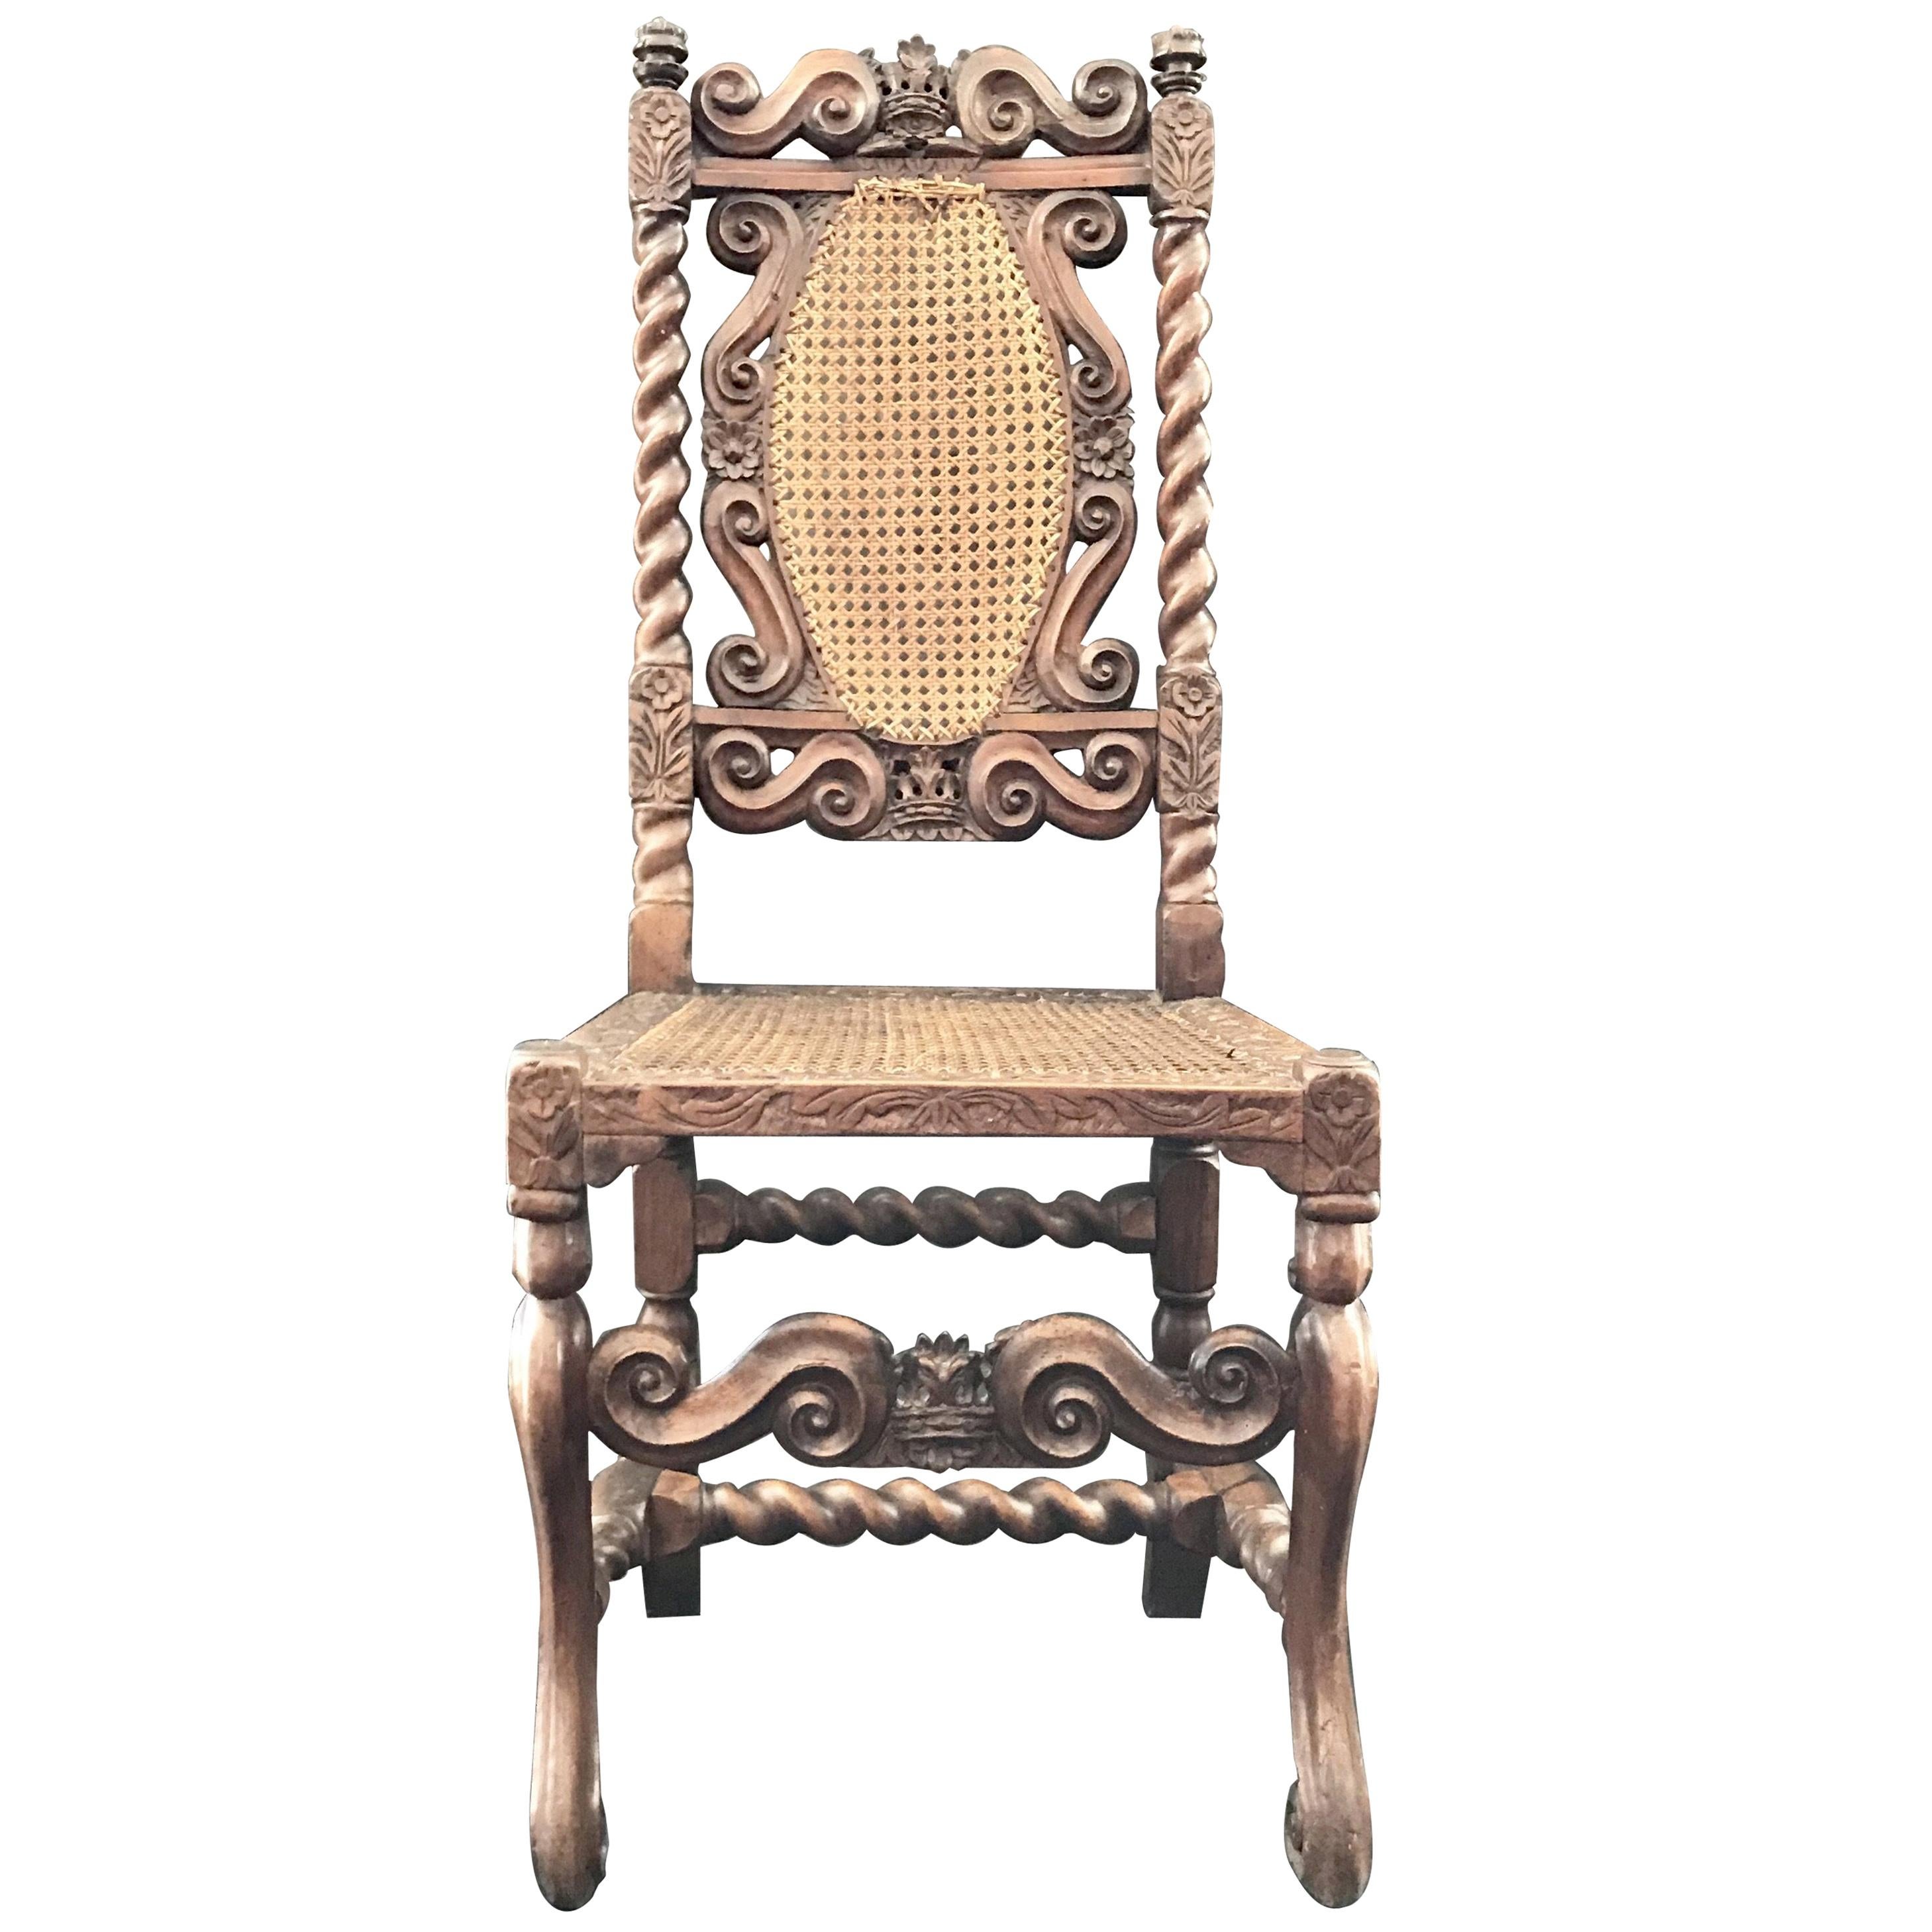 18th Century British Barley Twist Carved Caned Chair